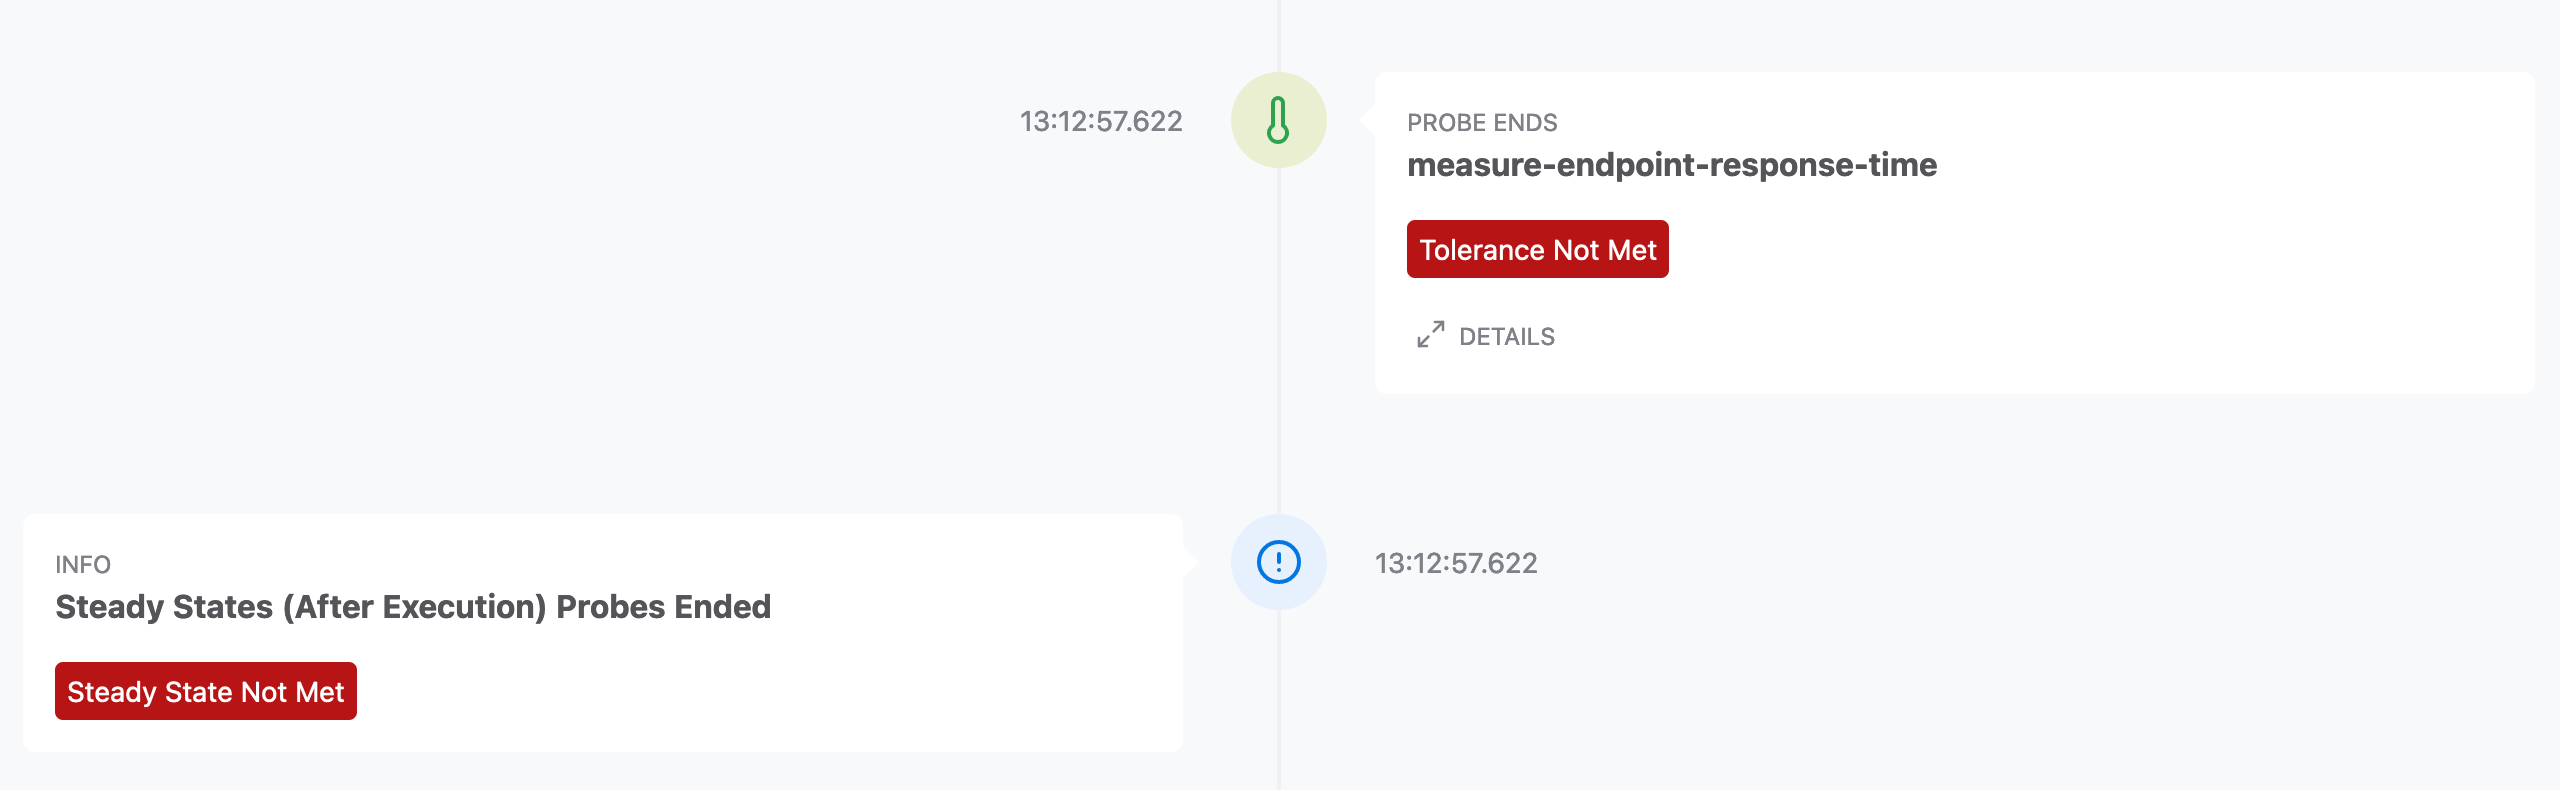 A screenshot showing two events in a timeline. The first event is the end of a probe activity. The probe is named measure-endpoint-response-time, and we can see it's tolerance was not met. The next event is the end of the steady-state hypothethis. It tells us the steady-state was not met, which is a consequence of the previous probe's tolerance not being met.